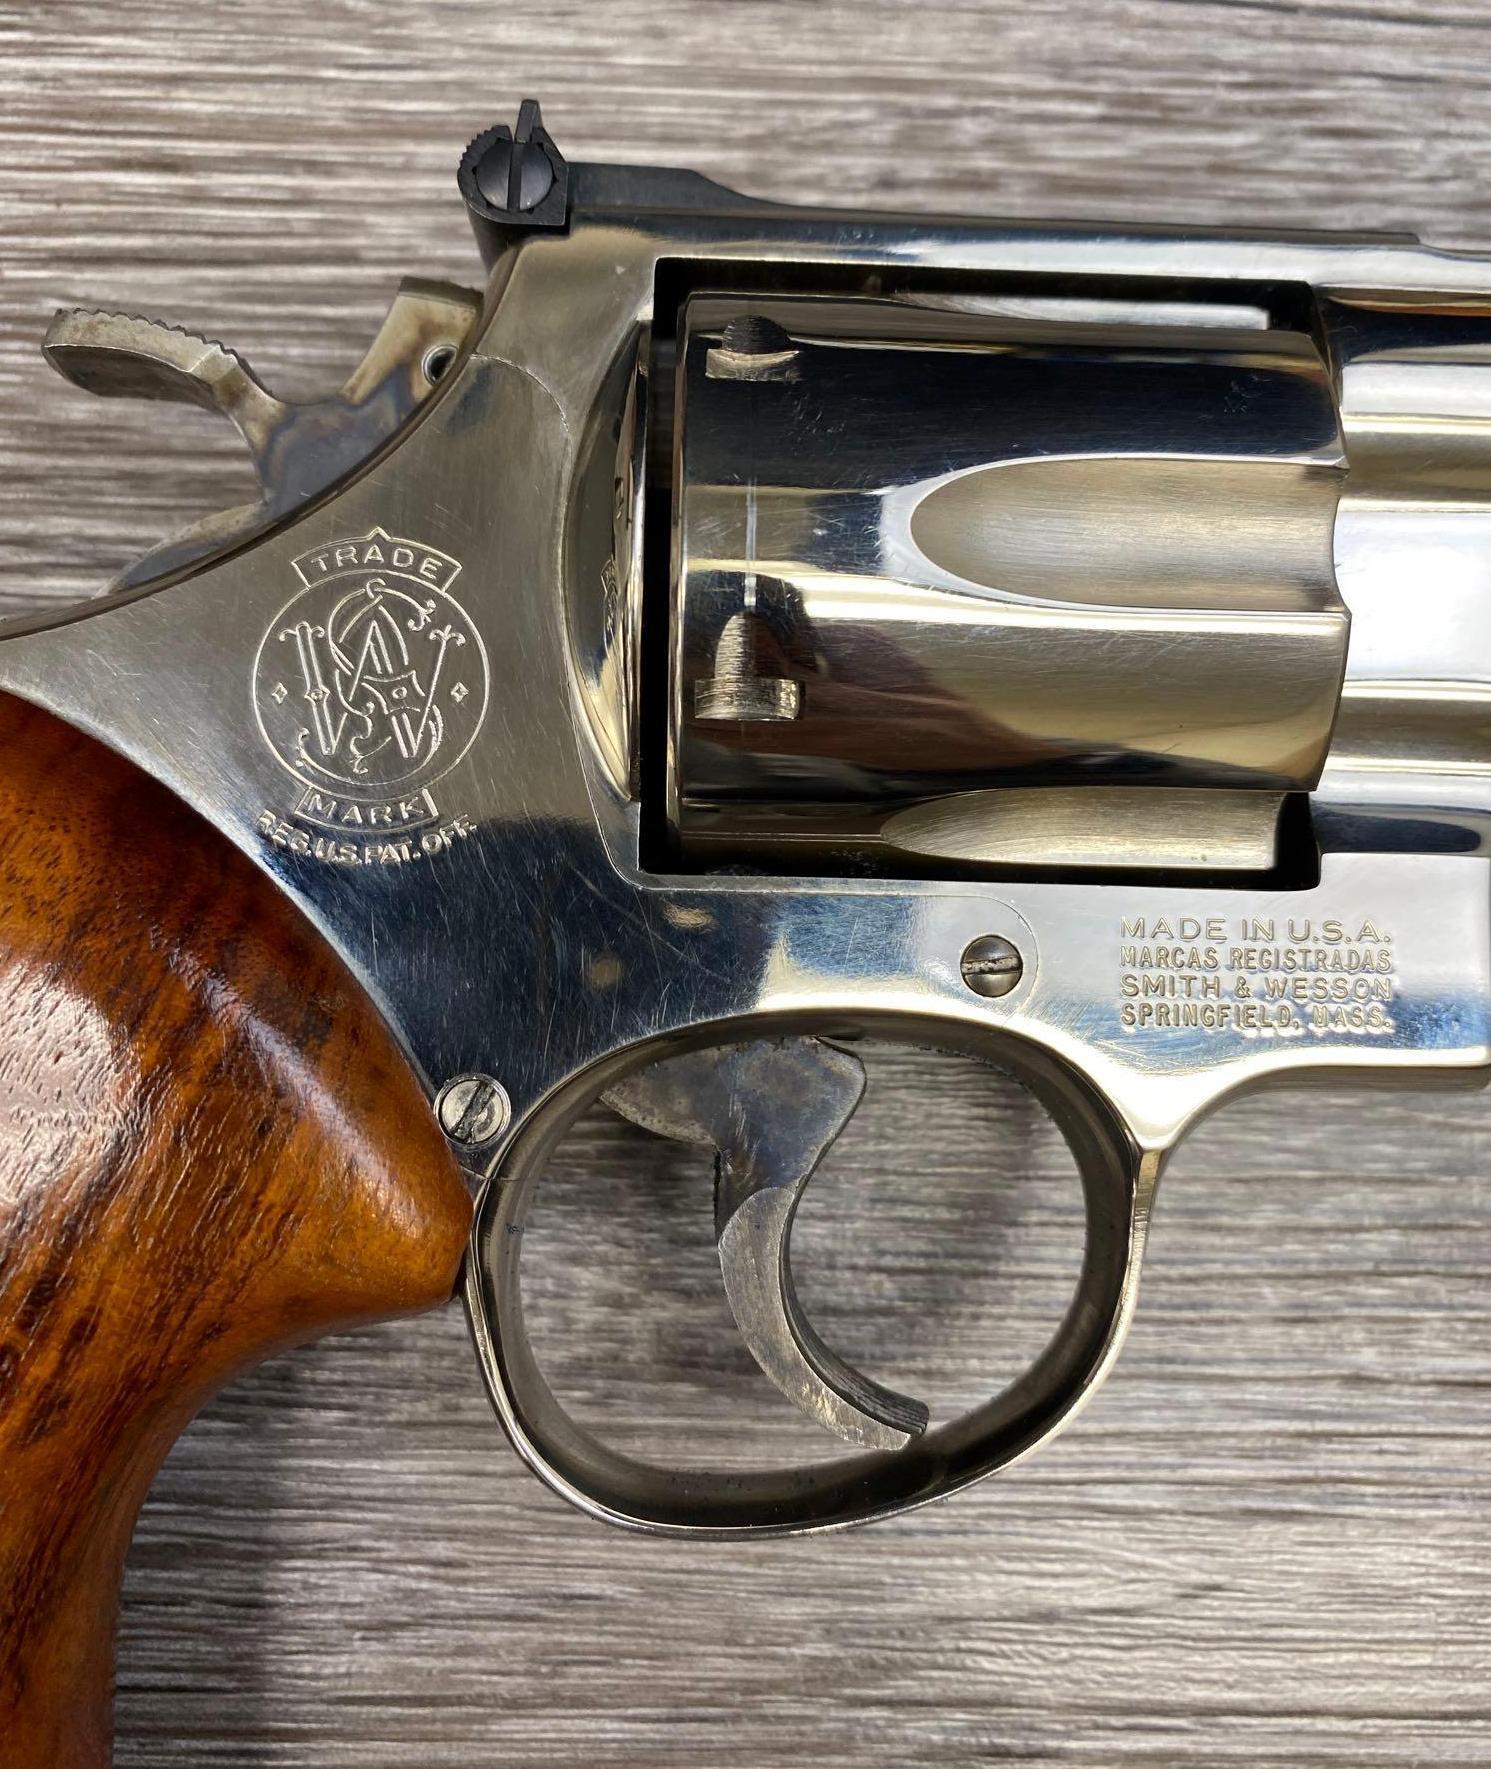 SMITH & WESSON MODEL 29-3 .44 MAG. CALIBER DA REVOLVER IN FACTORY WOOD CASE/CLEANING KIT/SCREWDRIVER